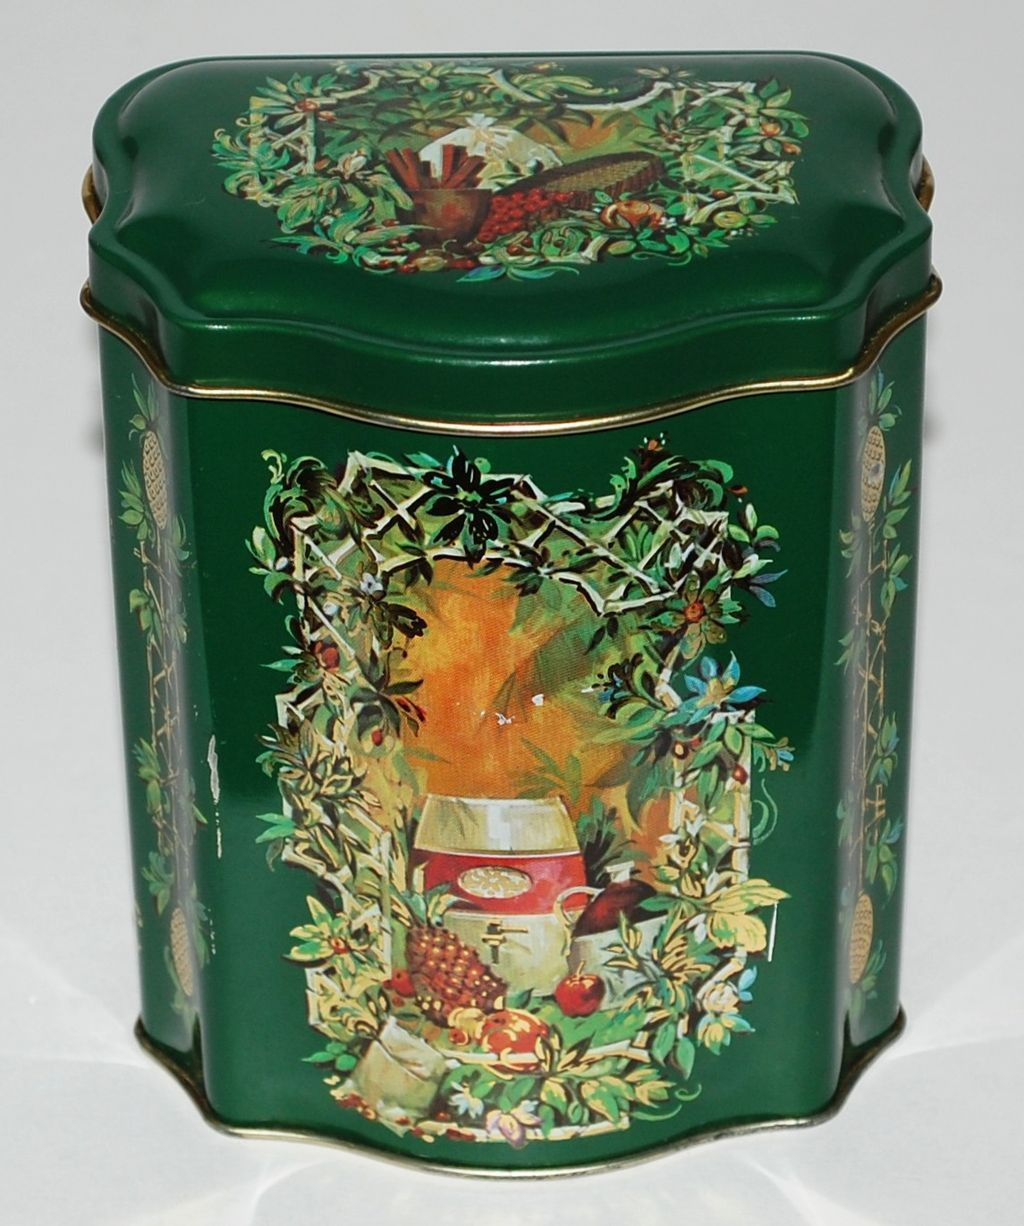 Christmas Candy Tins
 1981 Avon Christmas Candy Tin Made in England from